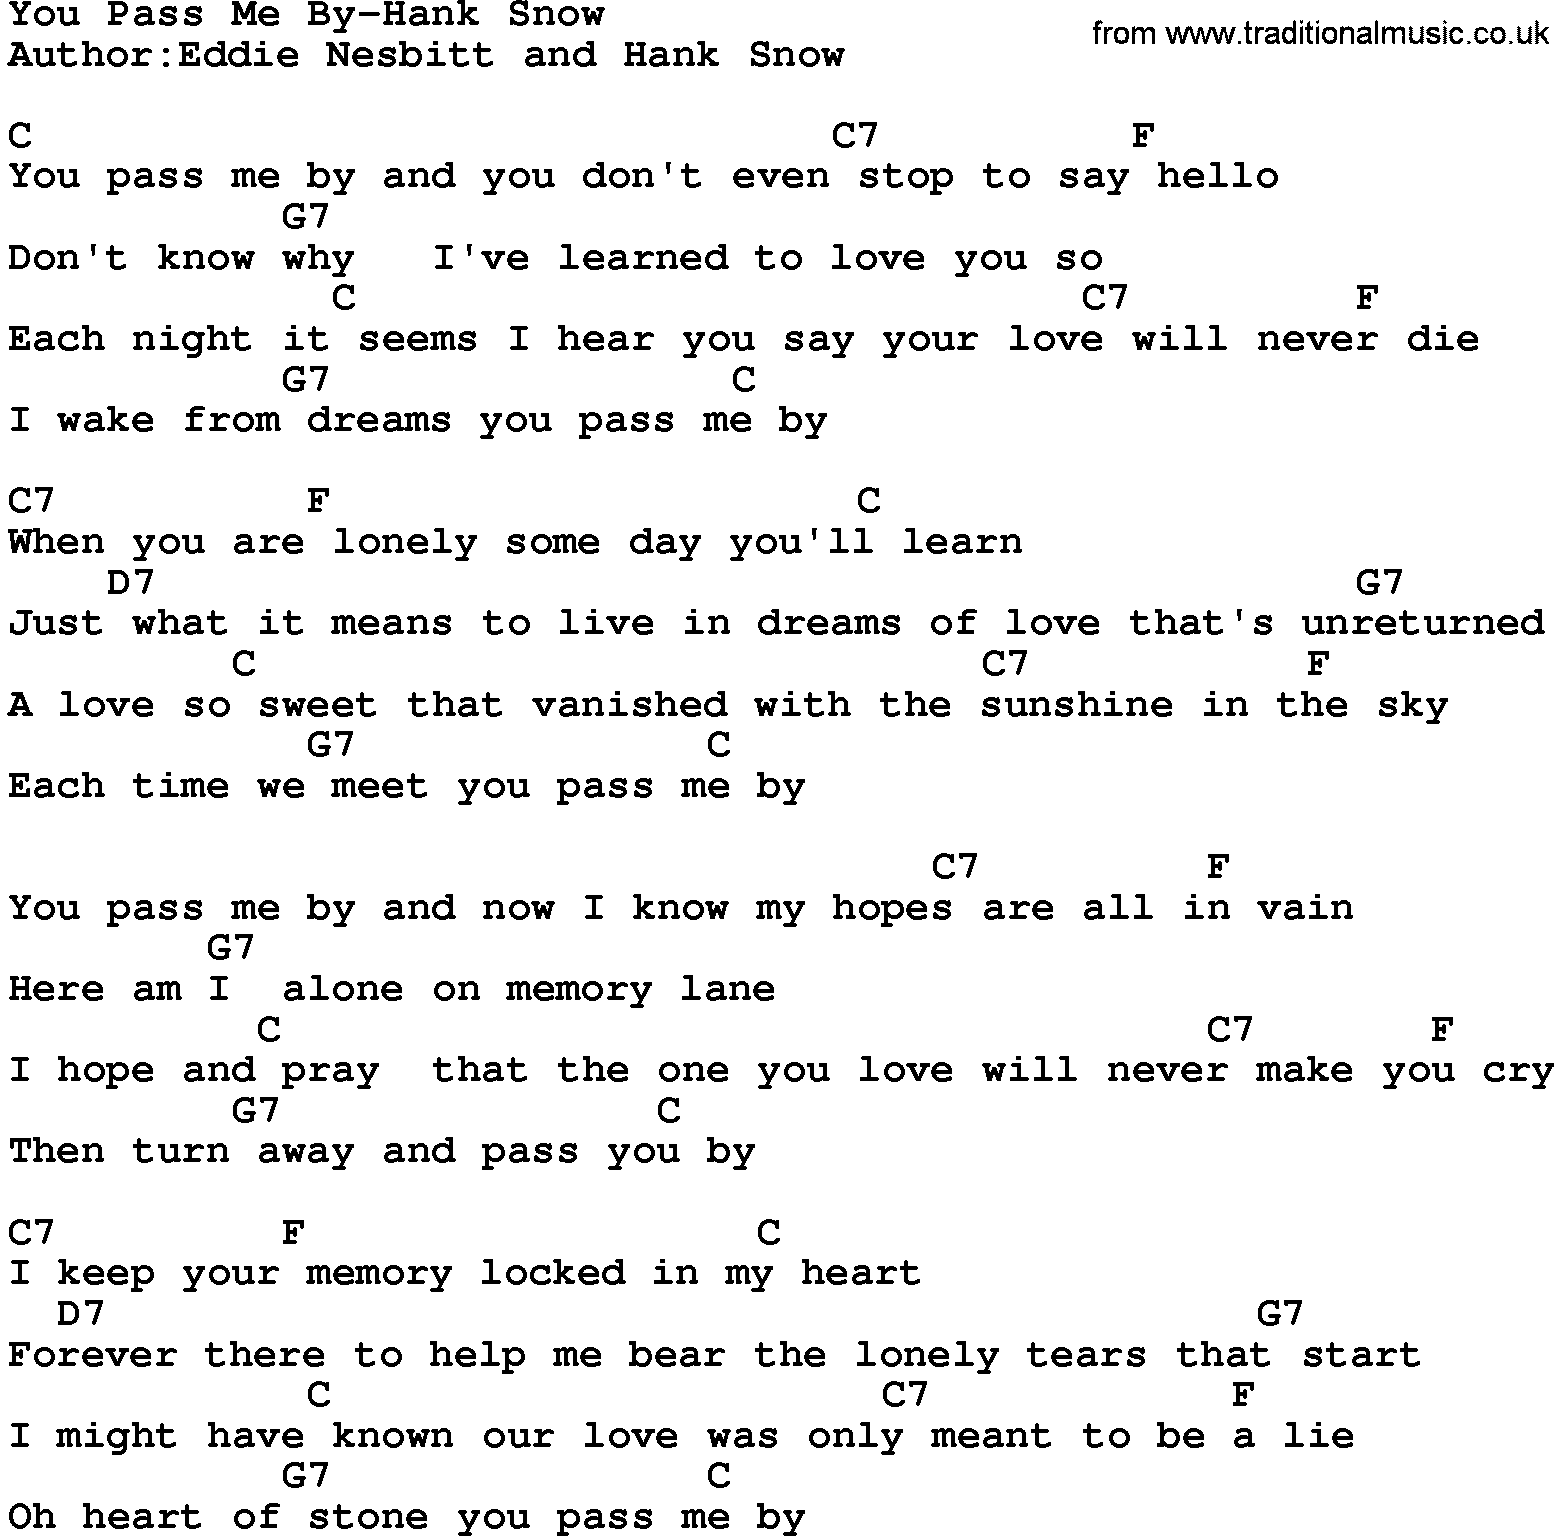 Country music song: You Pass Me By-Hank Snow lyrics and chords